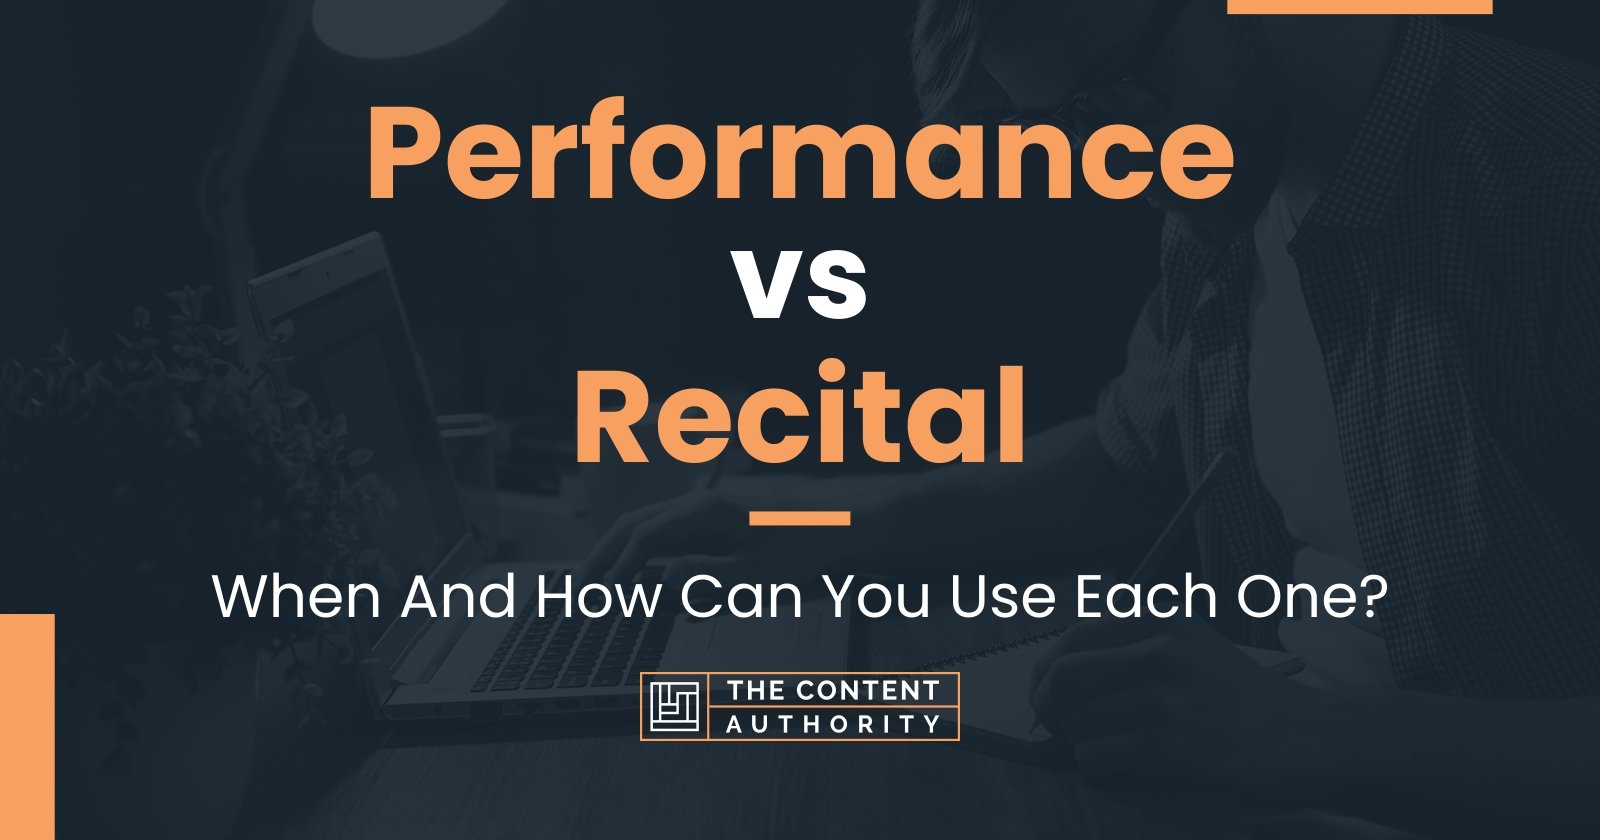 Performance vs Recital: When And How Can You Use Each One?